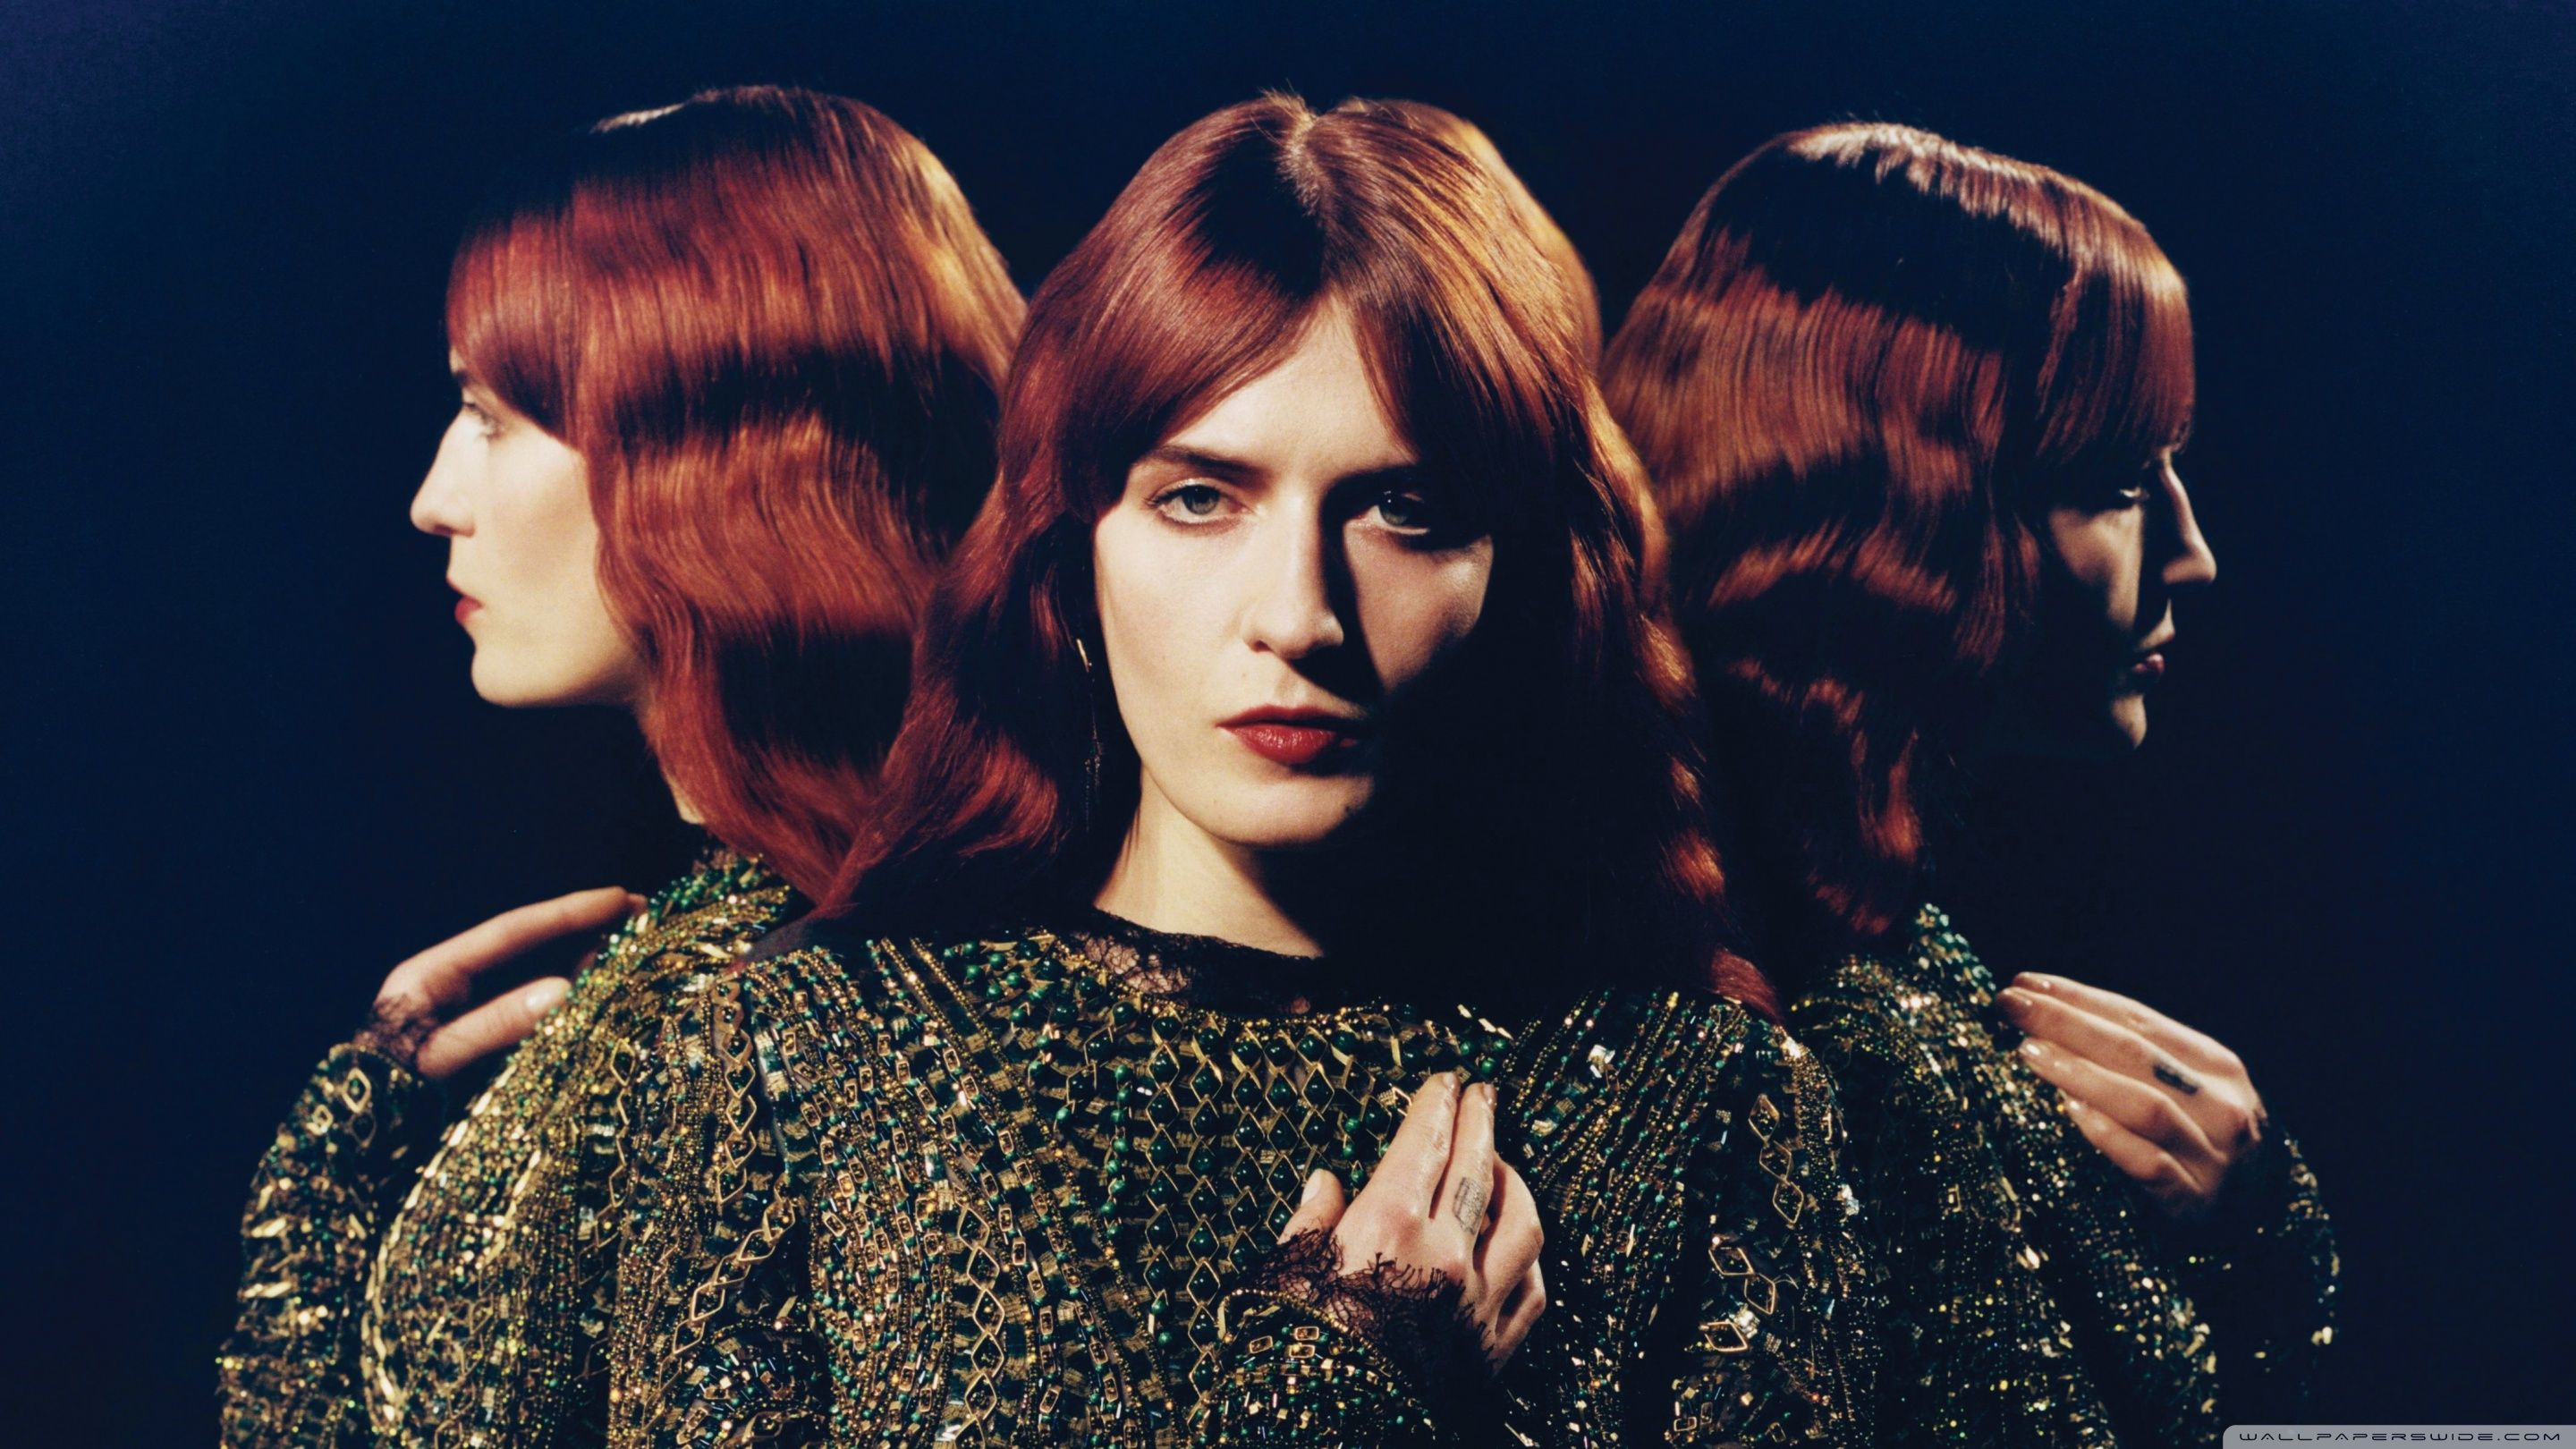 Florence And The Machine Wallpaper And The Machine